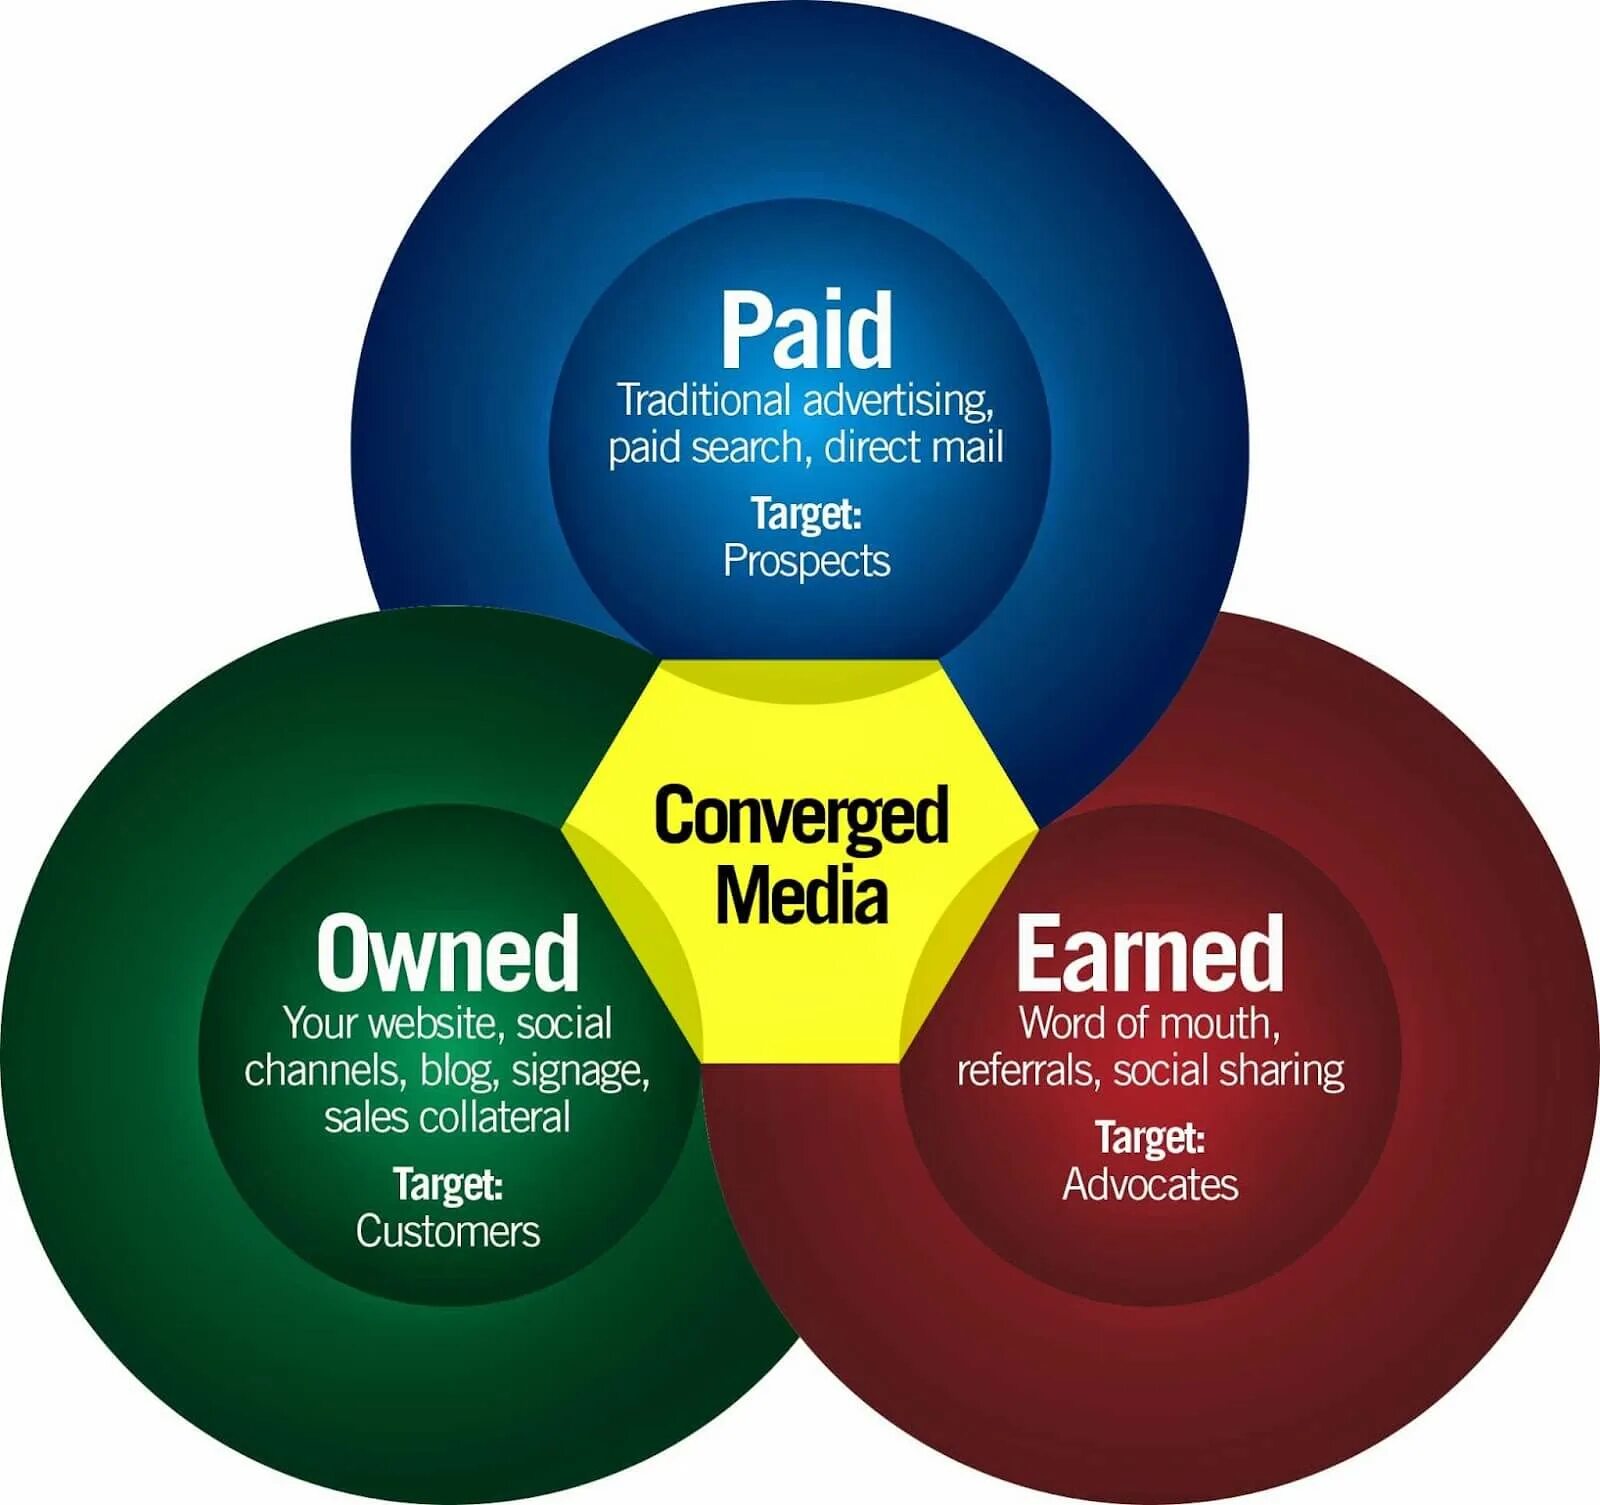 Traditional advertising. Paid owned earned Media. Traditional advertising Media. Paid advertising. Ad channel